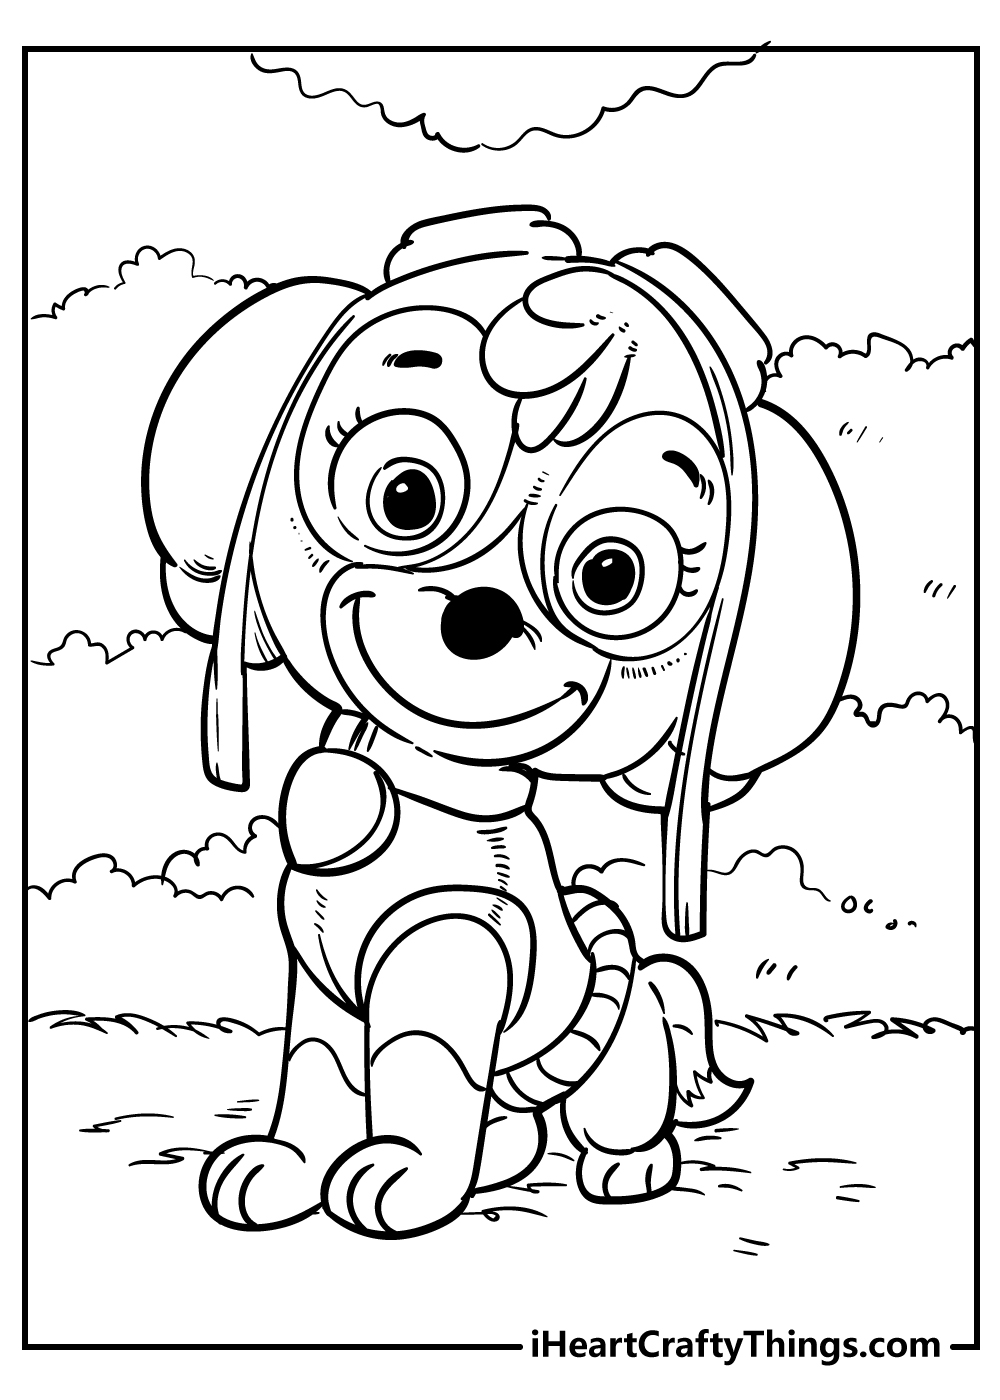 170+ Paw Patrol Coloring Pages for Action-Packed Fun 96